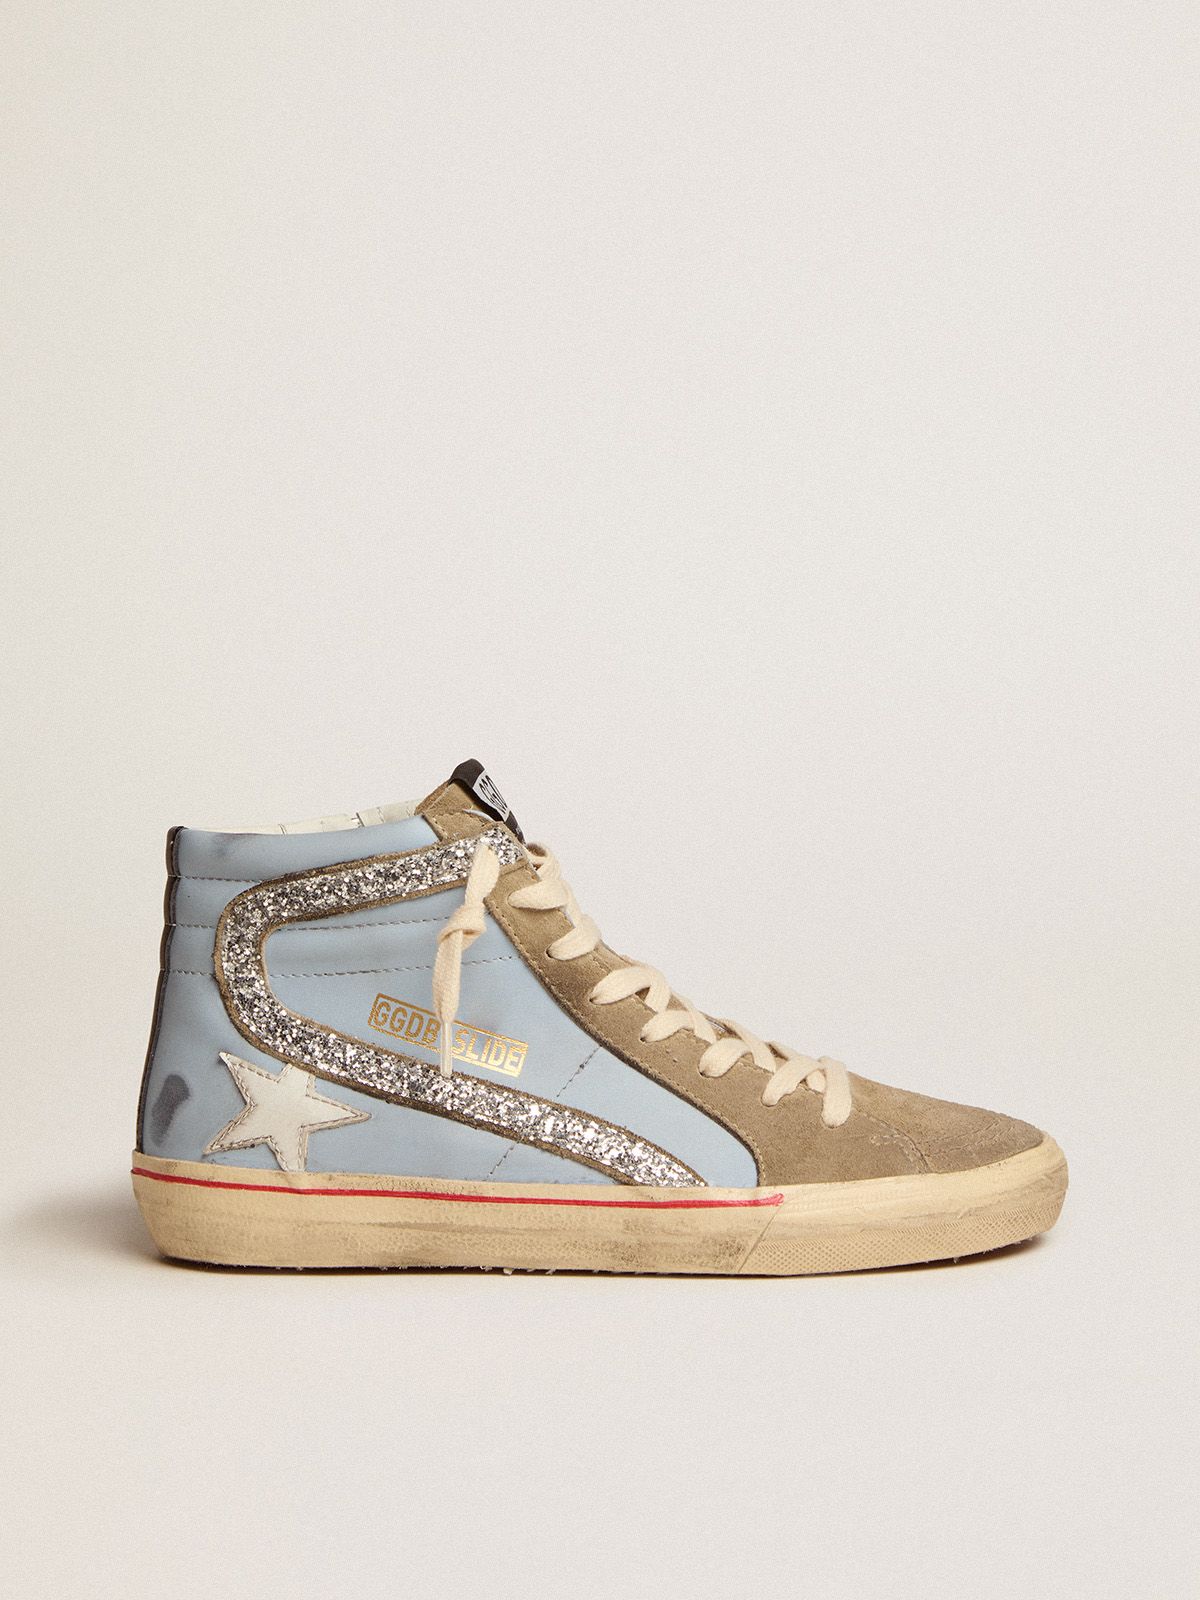 golden goose with powder-blue dove-gray Slide suede silver in flash sneakers leather glitter tongue and